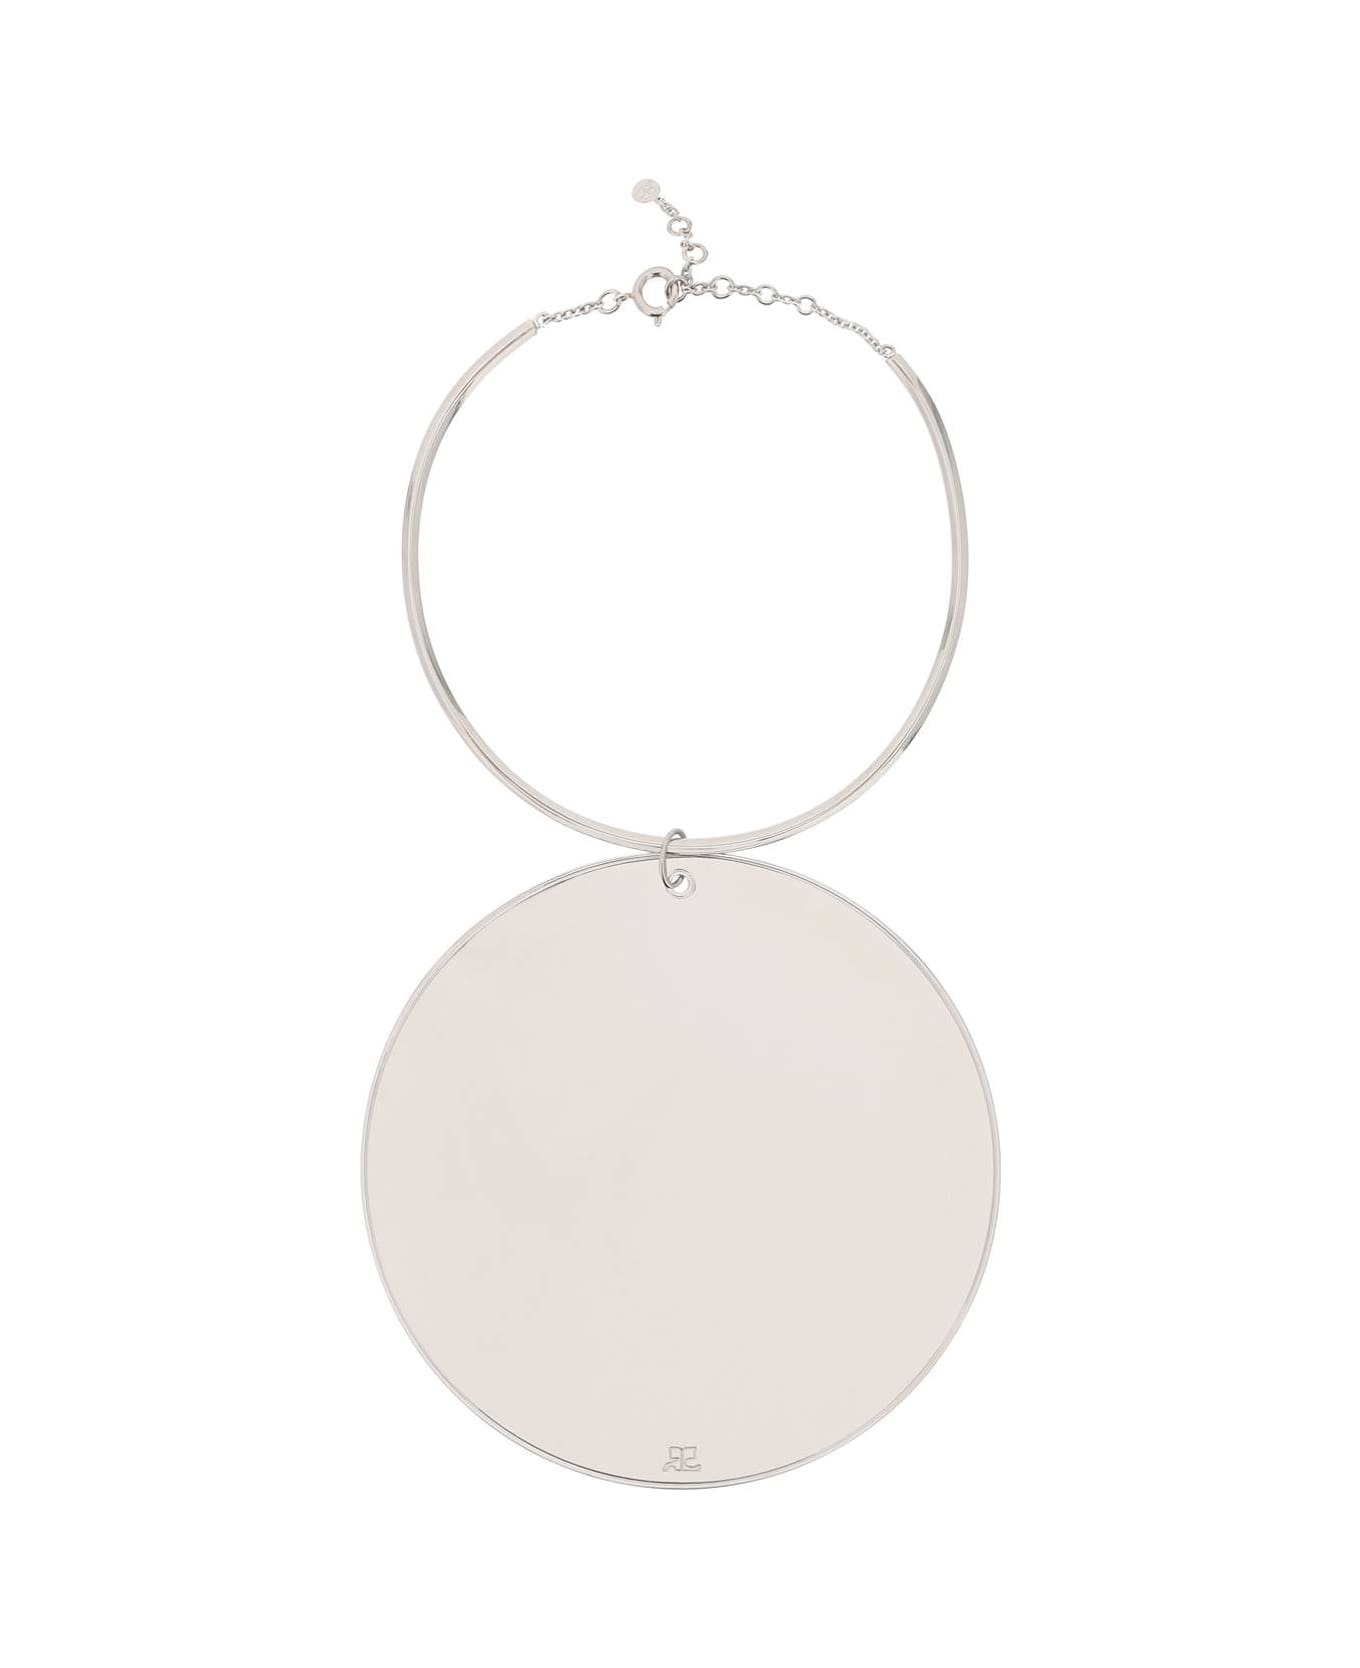 Courrèges Mirror Charm Necklace - Silver ネックレス